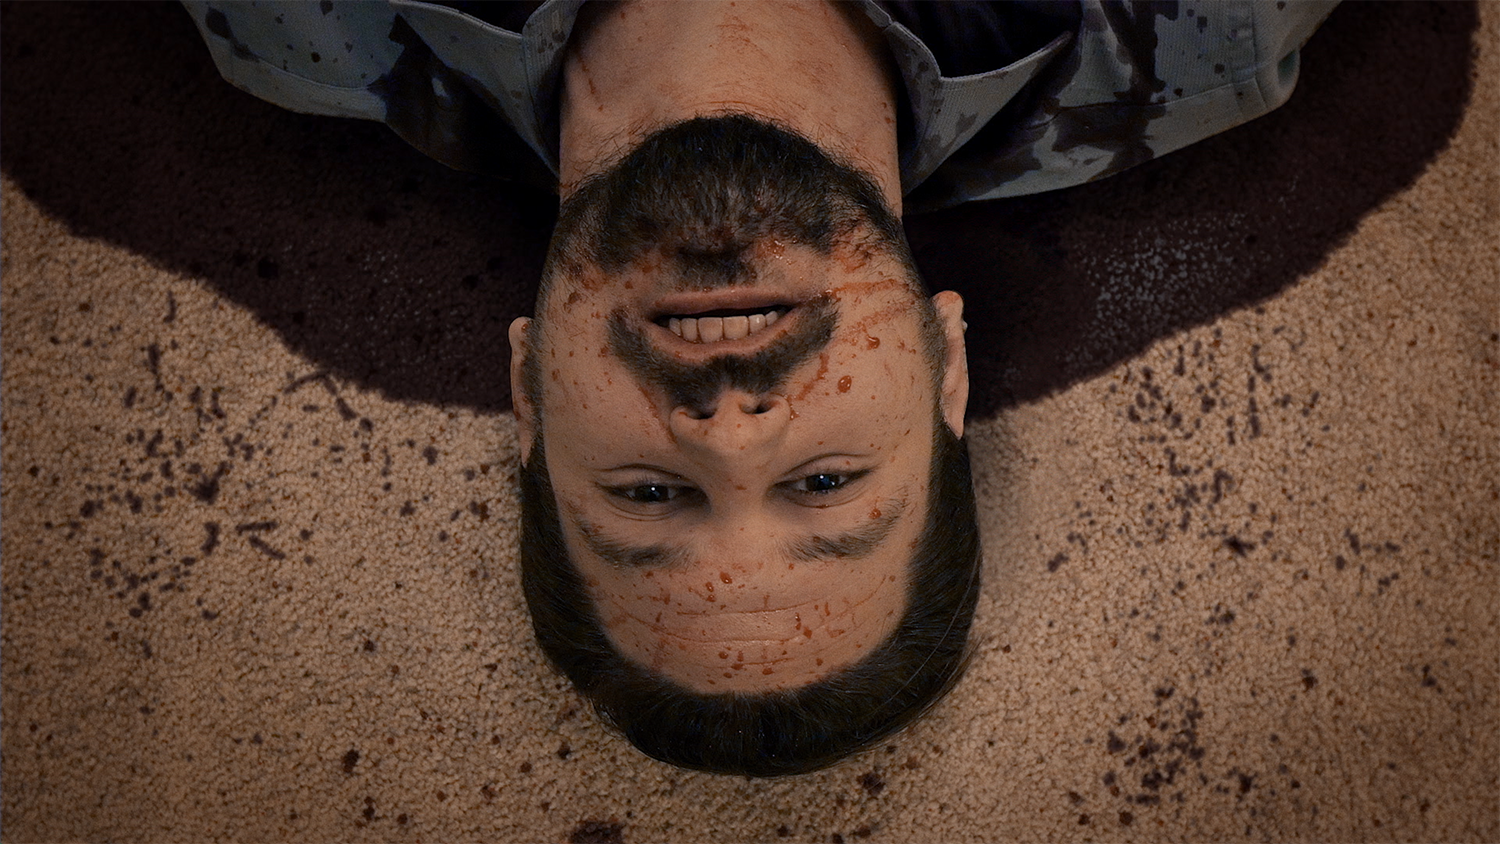 A bloodied actor lies on a carpeted floor in the movie Cruel Hearts, with additional blood VFX completed by Foxtrot X-Ray